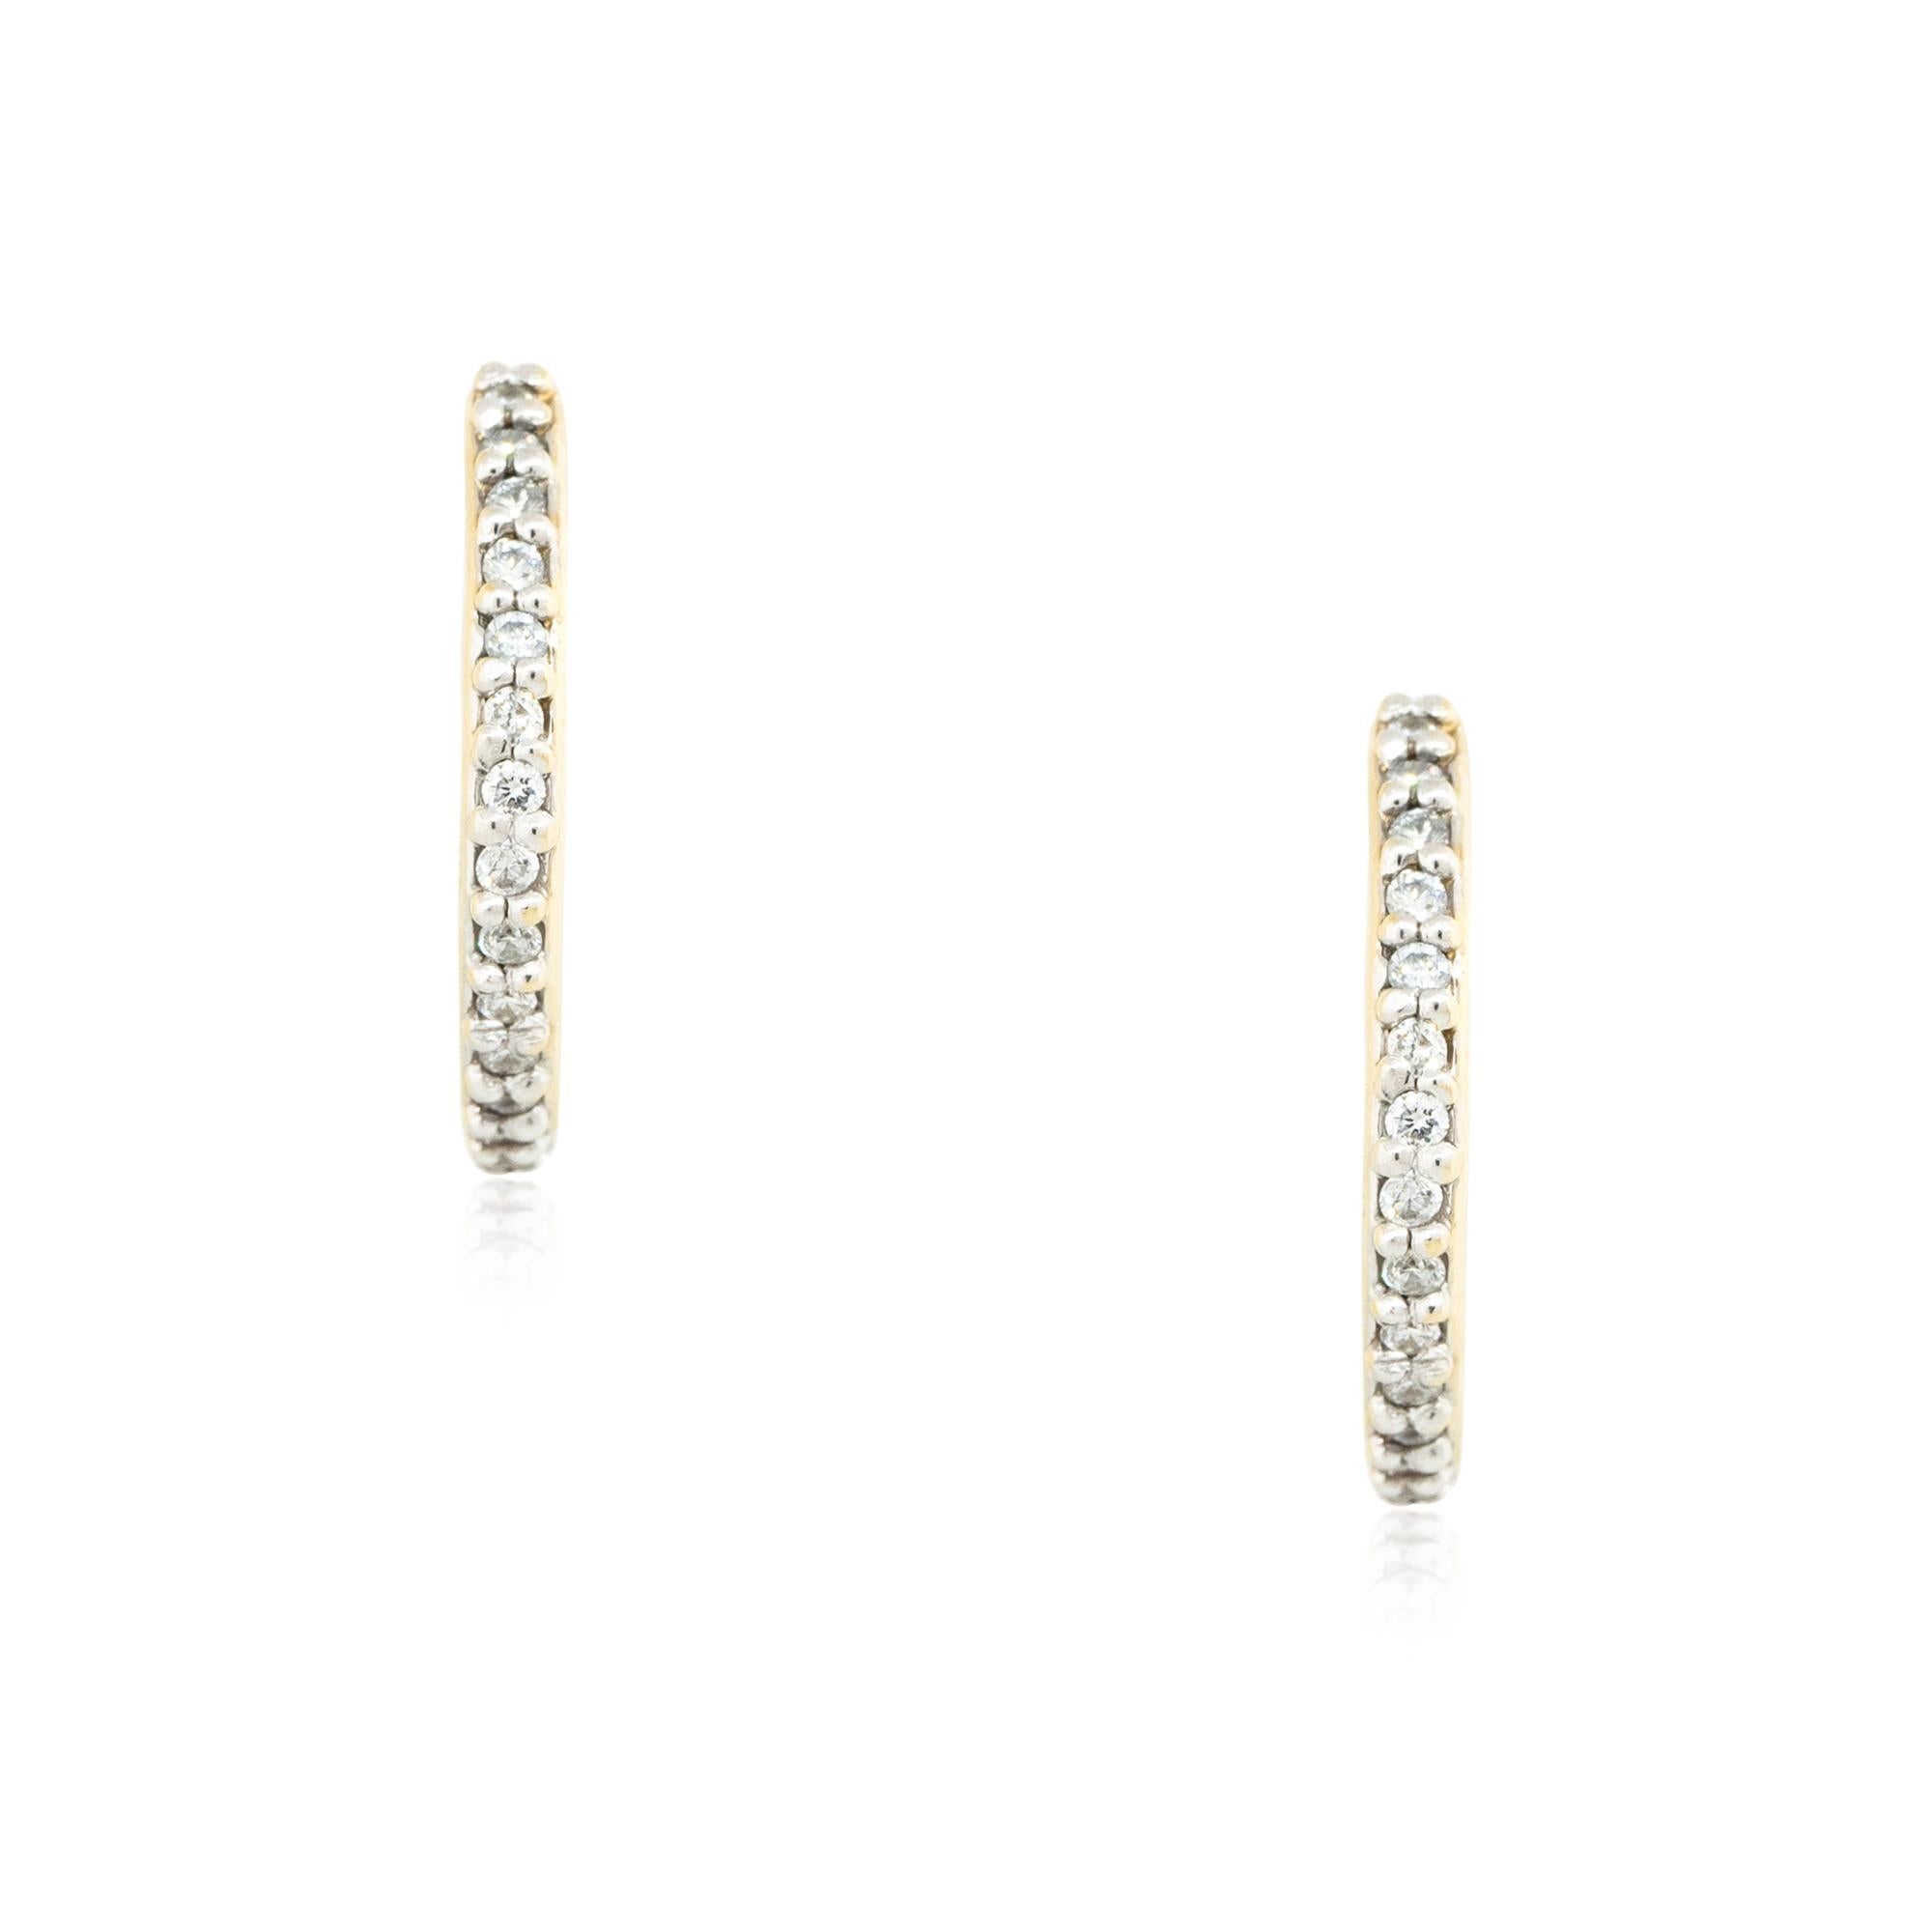 Material: 18k Yellow Gold
Diamond Details: Approx. 1.10ctw of round cut Diamonds. Diamonds are H/I in color and SI in clarity
Total Weight: 3.1dwt 
Earring Backs: Latch Backs
Additional Details: This item comes with a presentation box!
SKU: G12526